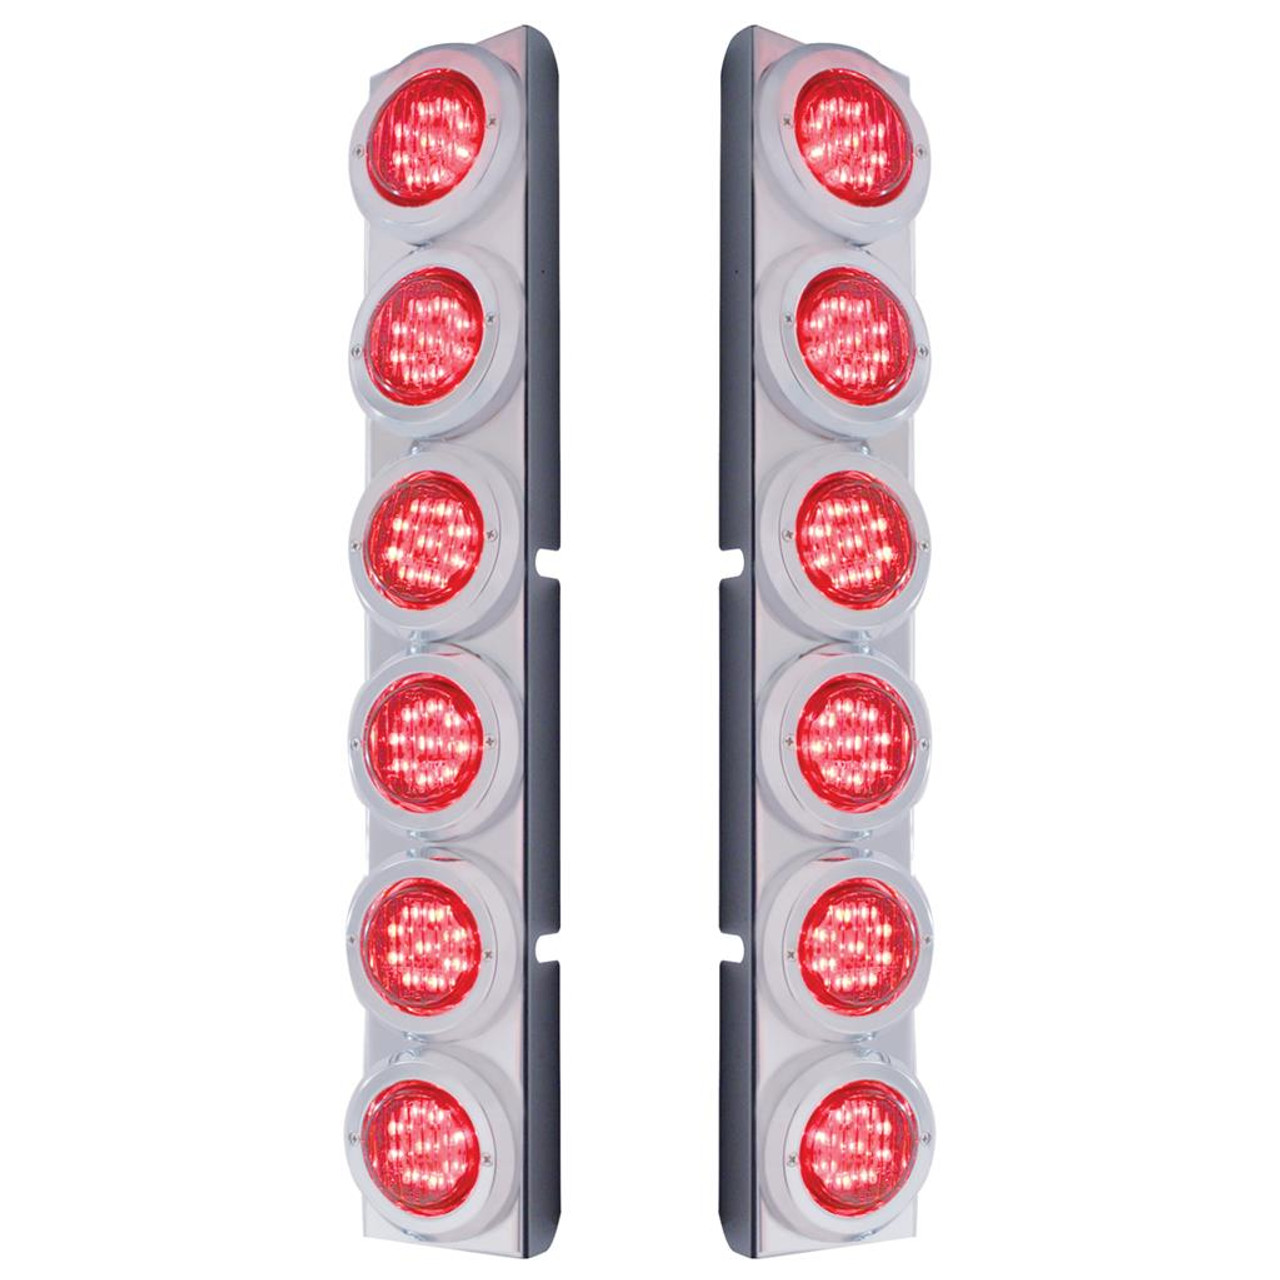 Peterbilt Stainless Rear Air Cleaner Bracket With 12 Flat LED Lights & Bezel Pair - Red LED/Red Lens